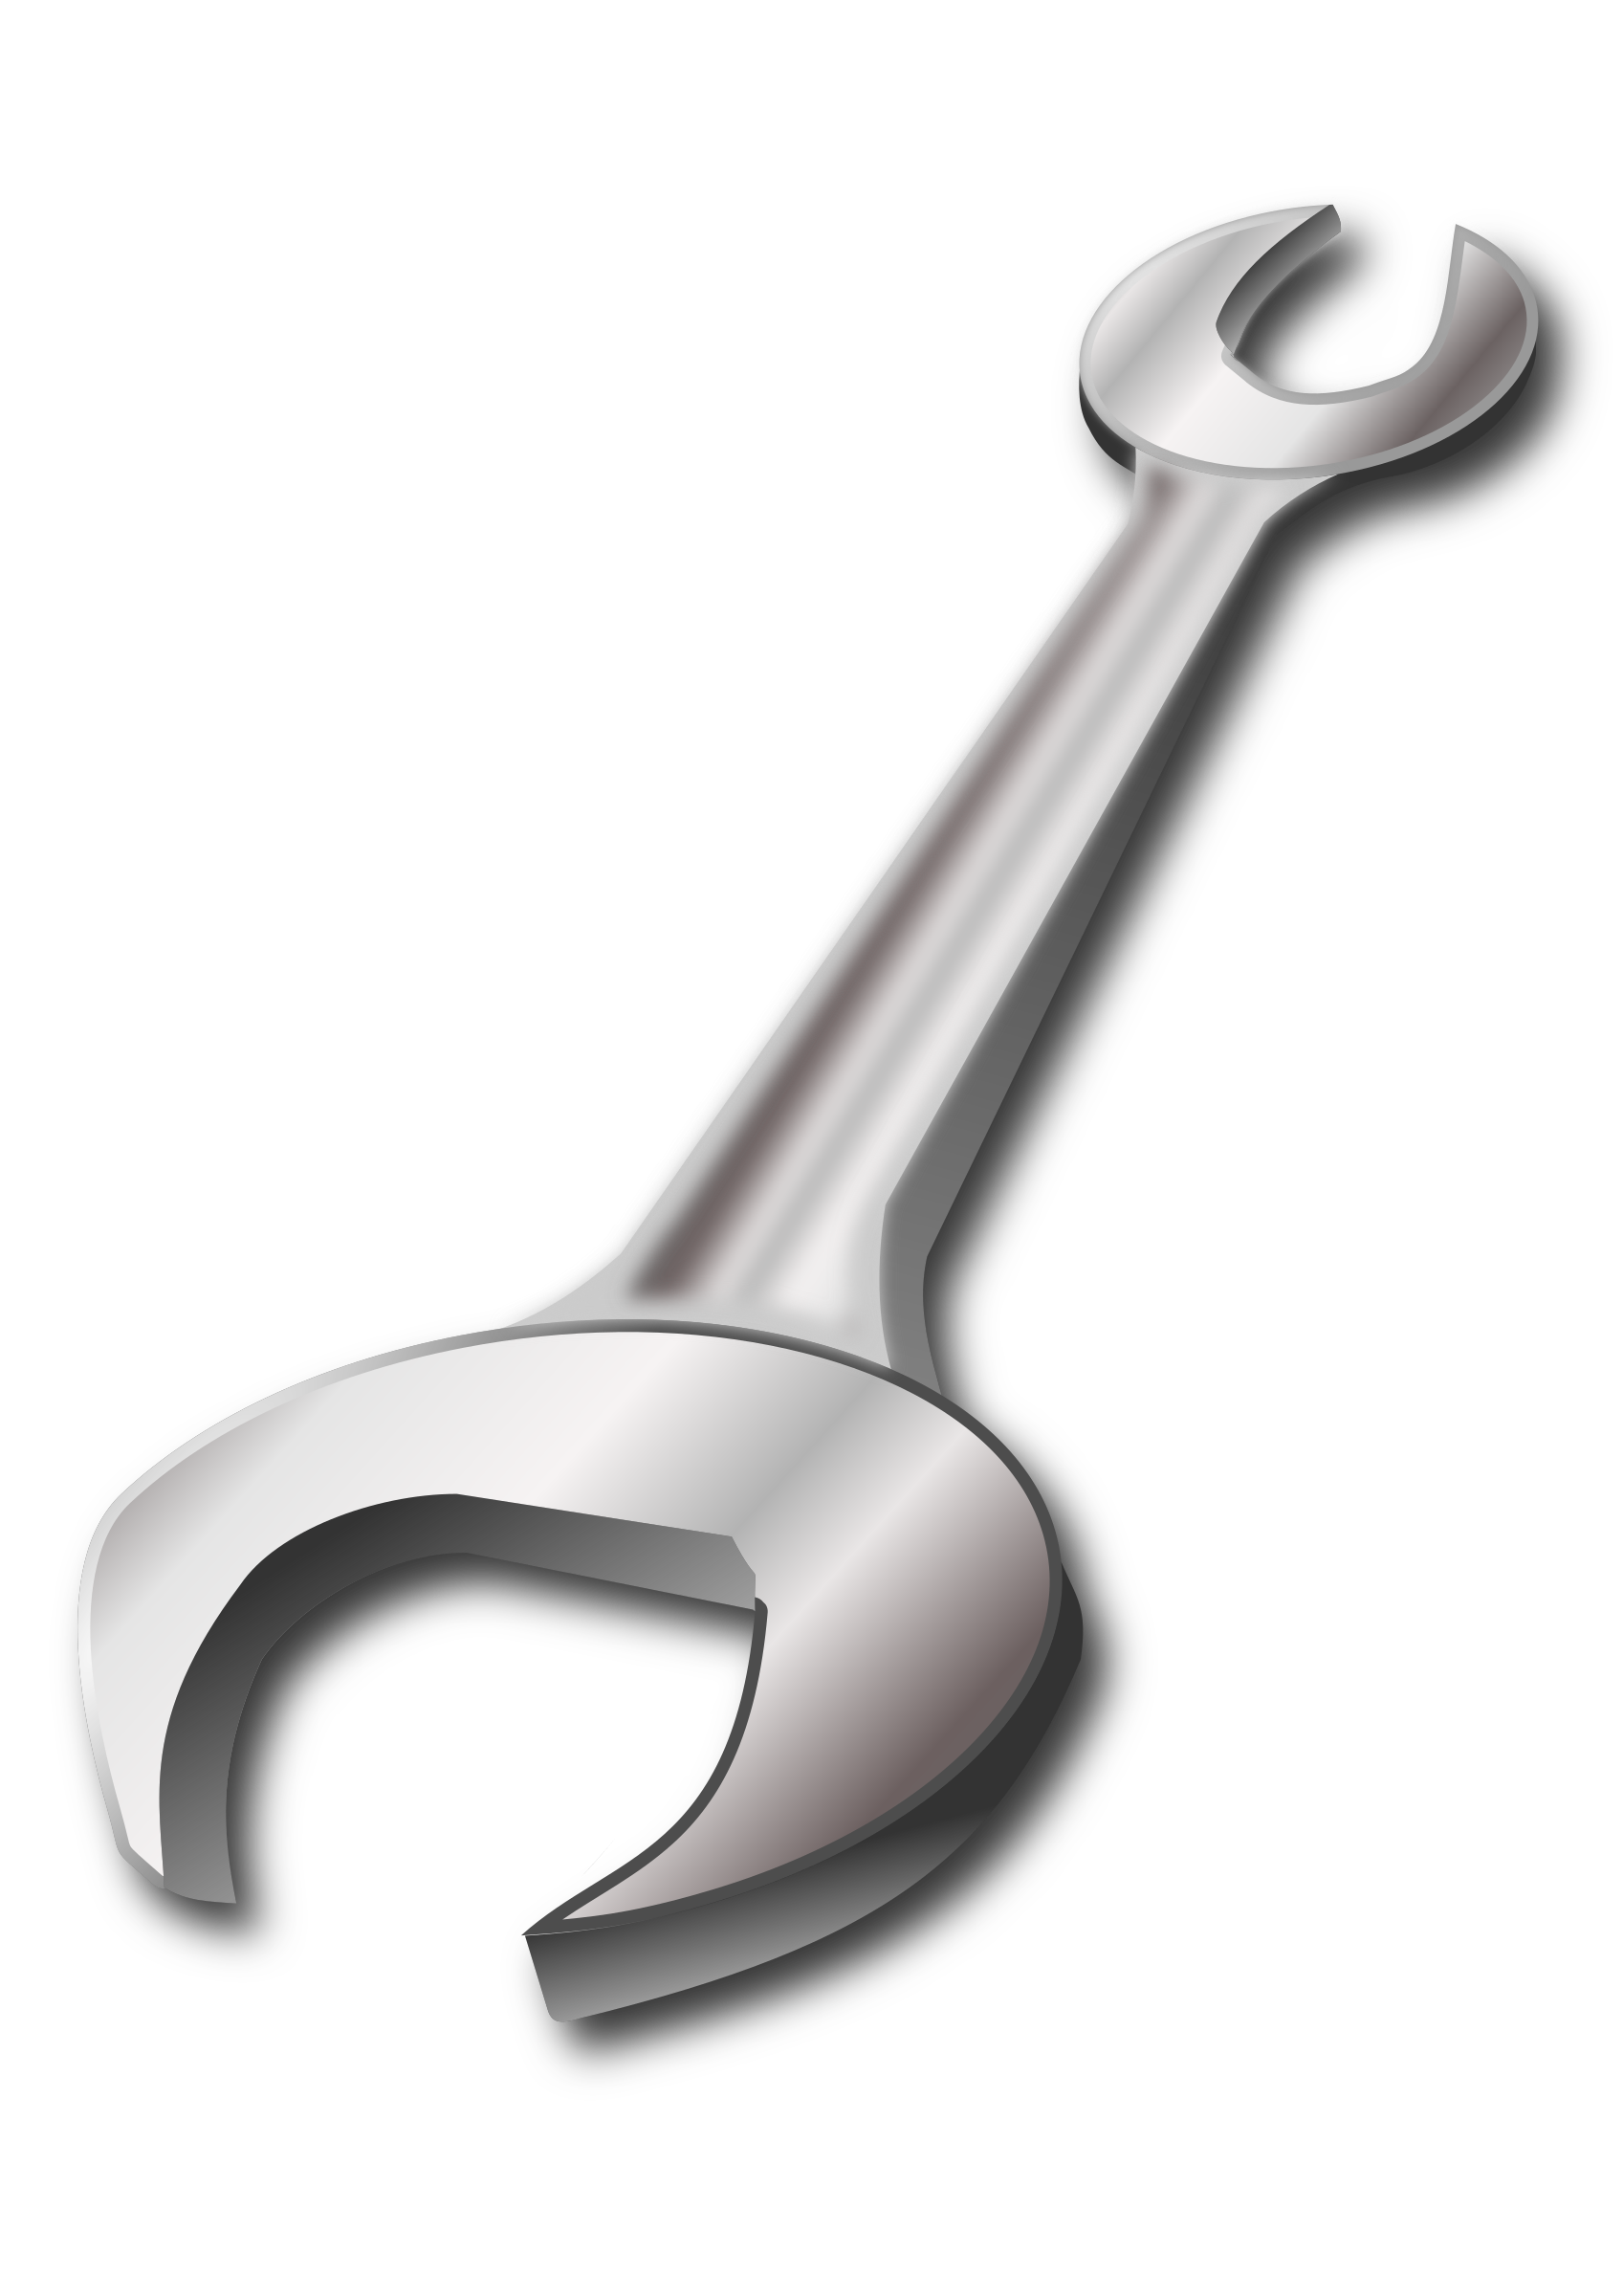 Big image png. Clipart hands wrench